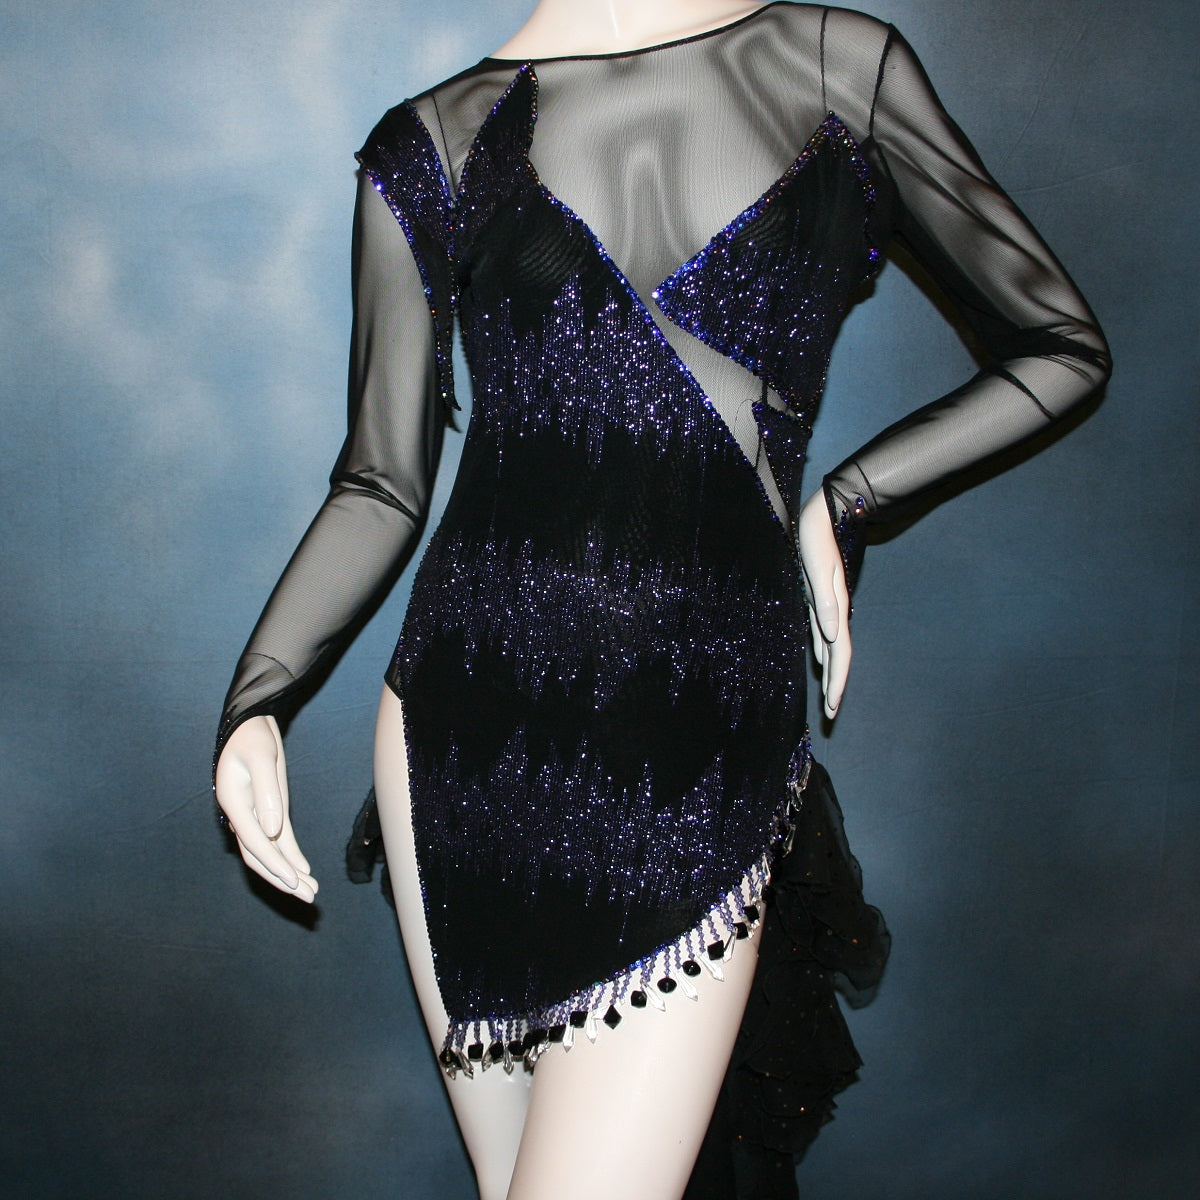 Crystal's Creations Close up view of Latin/rhythm/tango dress created in black glitter slinky with an awesome electrifying tanzanite/perwinkle glitter pattern artistically placed on a black stretch mesh base, embellished with crystal heliotrope Preciosa rhinestone work, hand beading & features flounces in the back skirting.